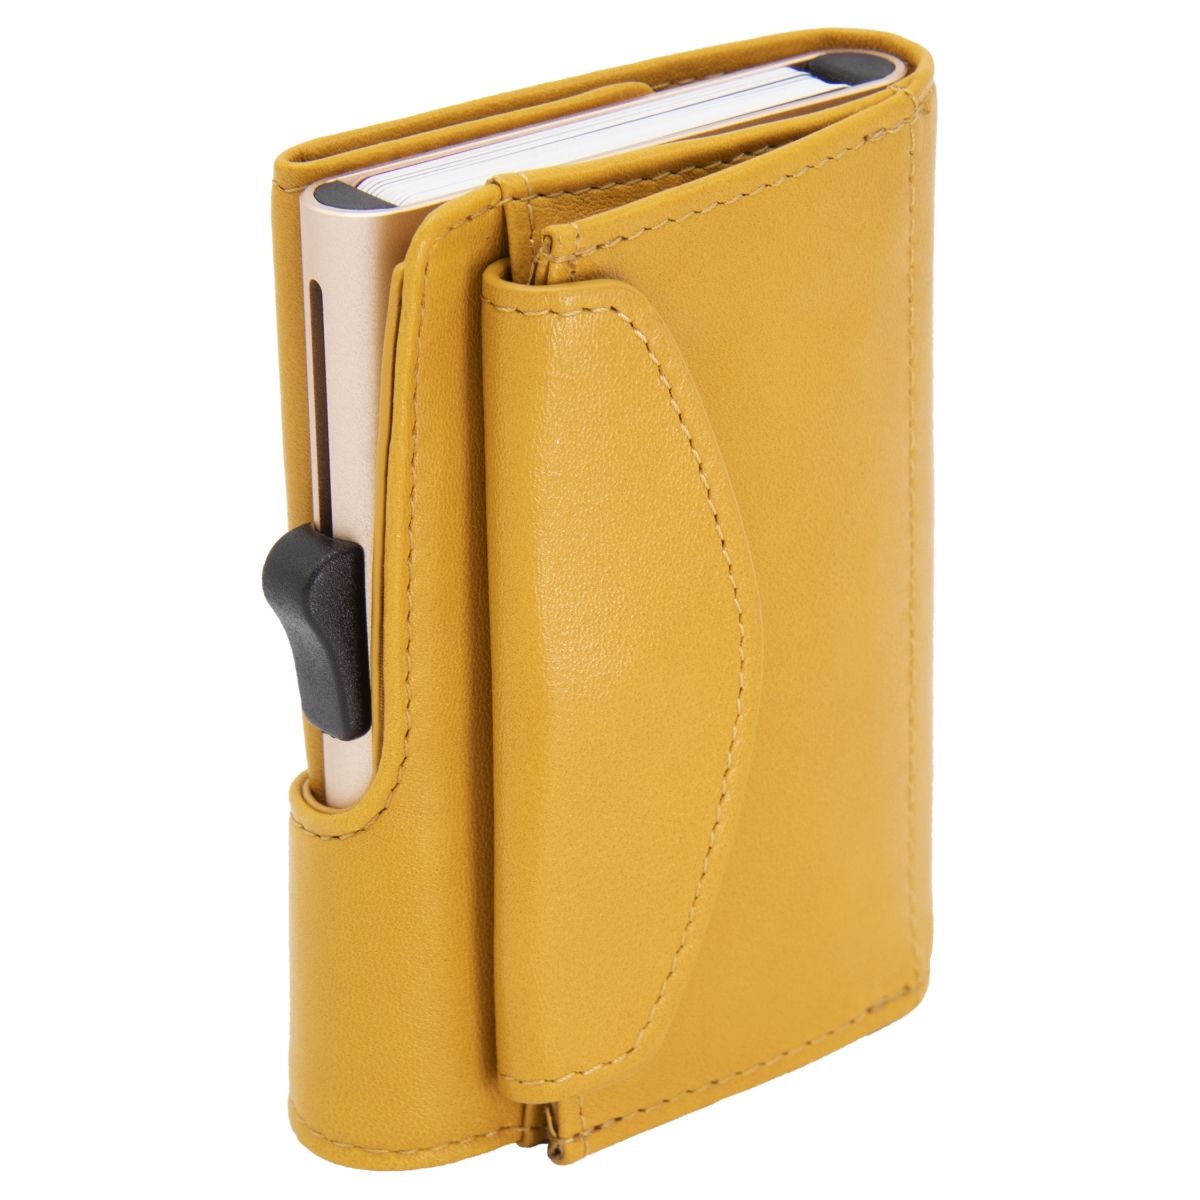 C-Secure XL Aluminum Wallet with Genuine Leather and Coins Pocket - Solis Yellow